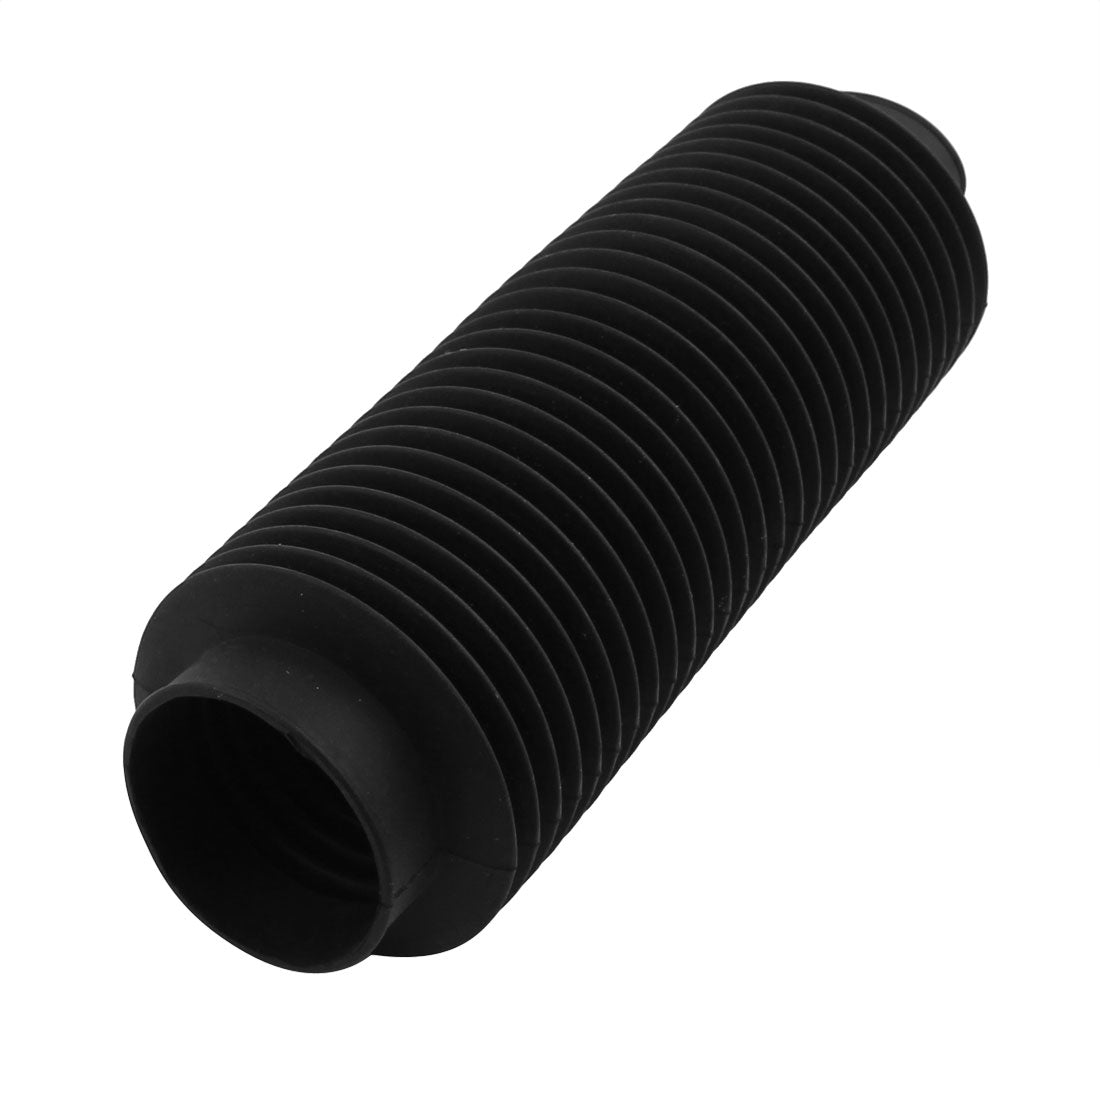 uxcell Uxcell 50mm Inner Diameter Machinery Black Rubber Flexibility Corrugated Sleeve Bellows